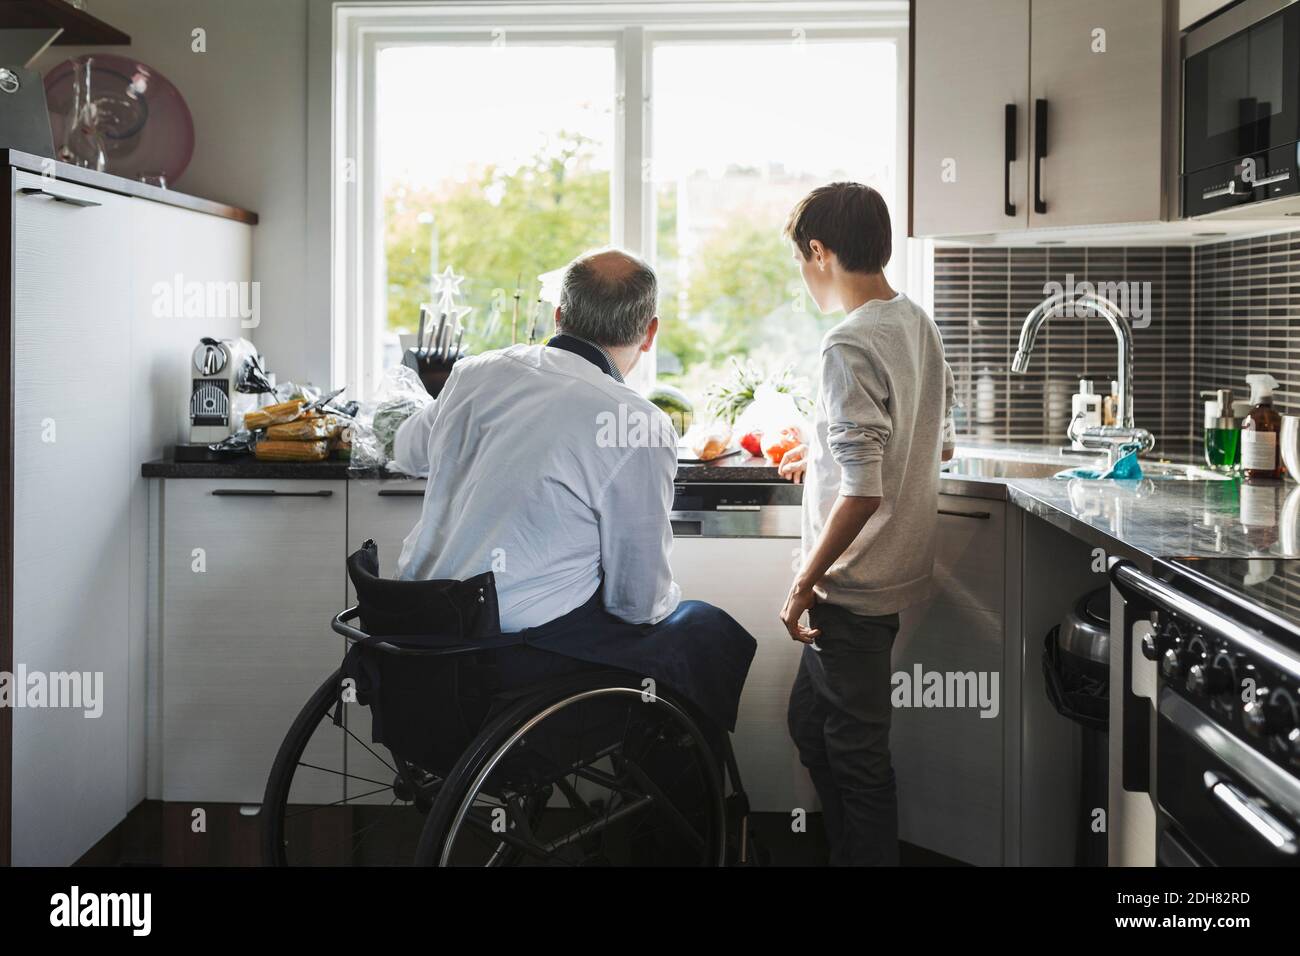 Disabled father preparing food son in kitchen Stock Photo